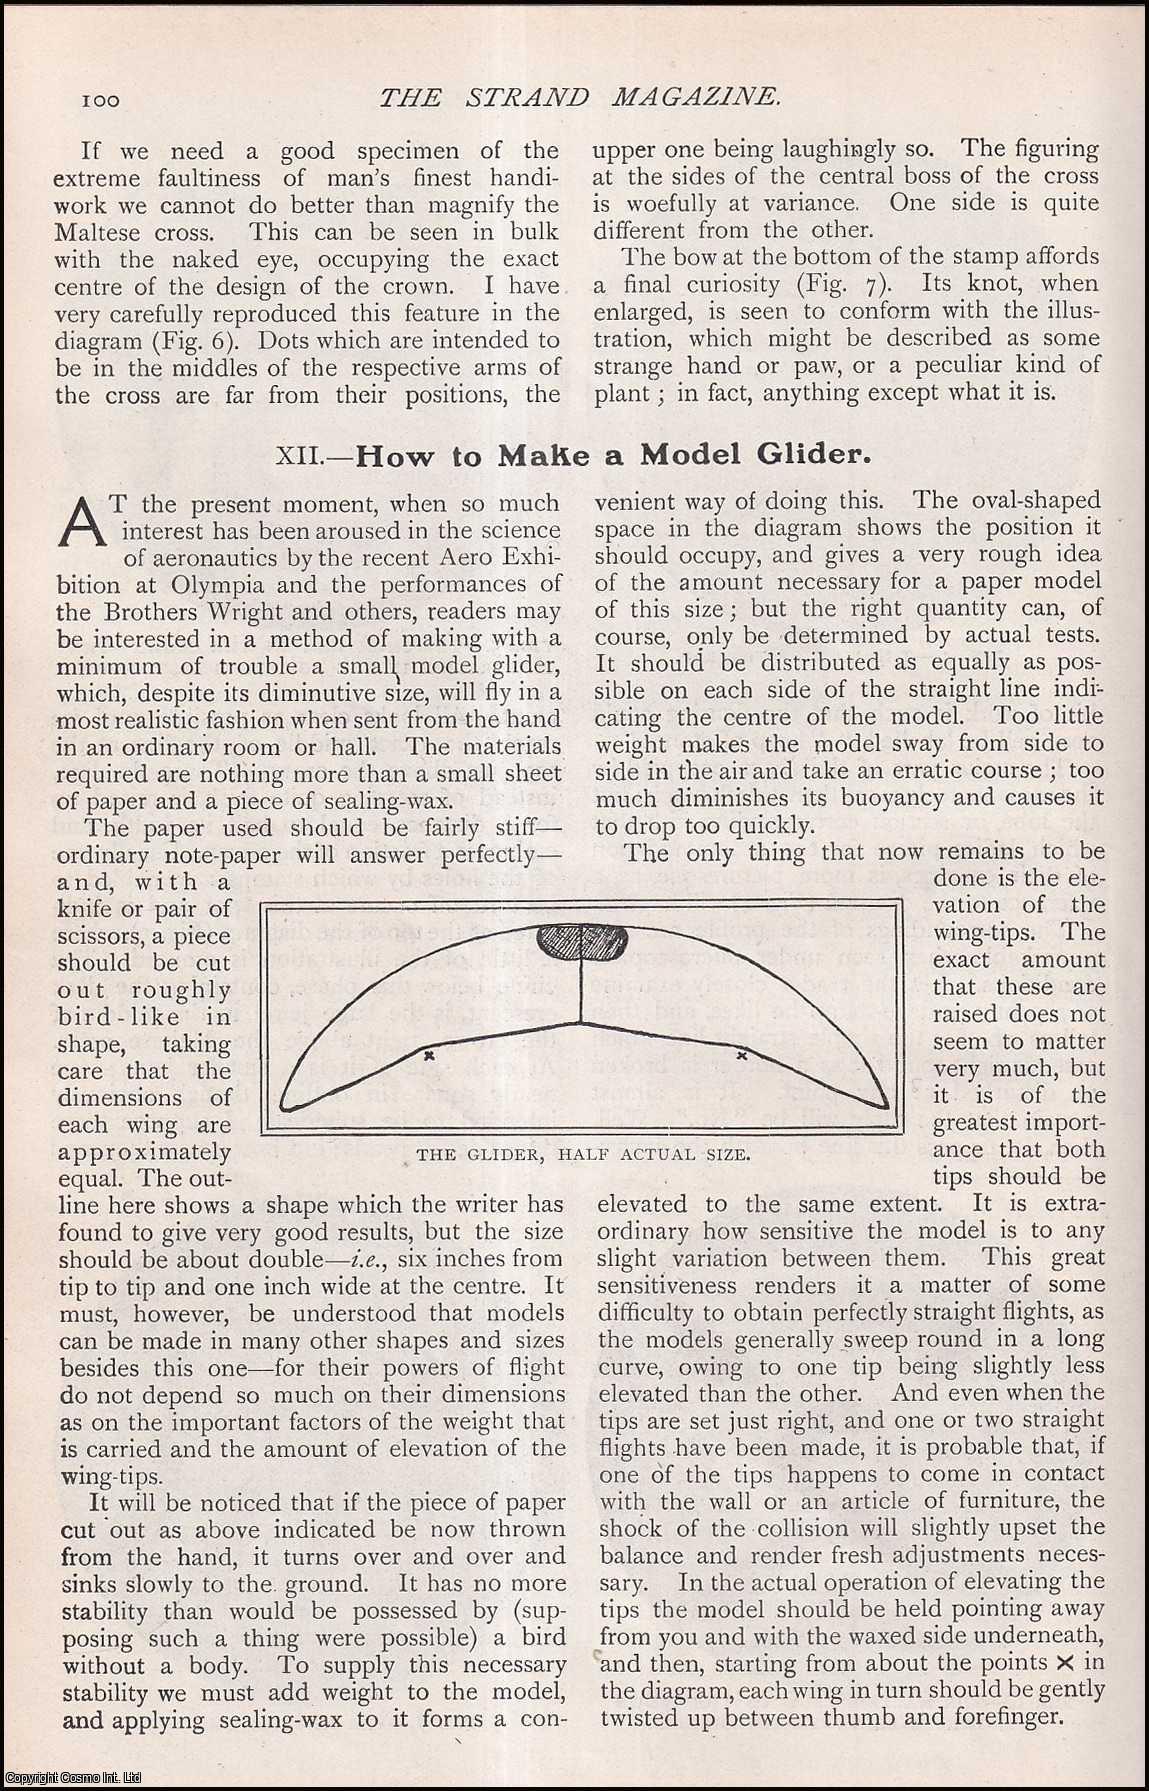 --- - How to Make a Model Glider. A rare original article from The Strand Magazine, 1909.